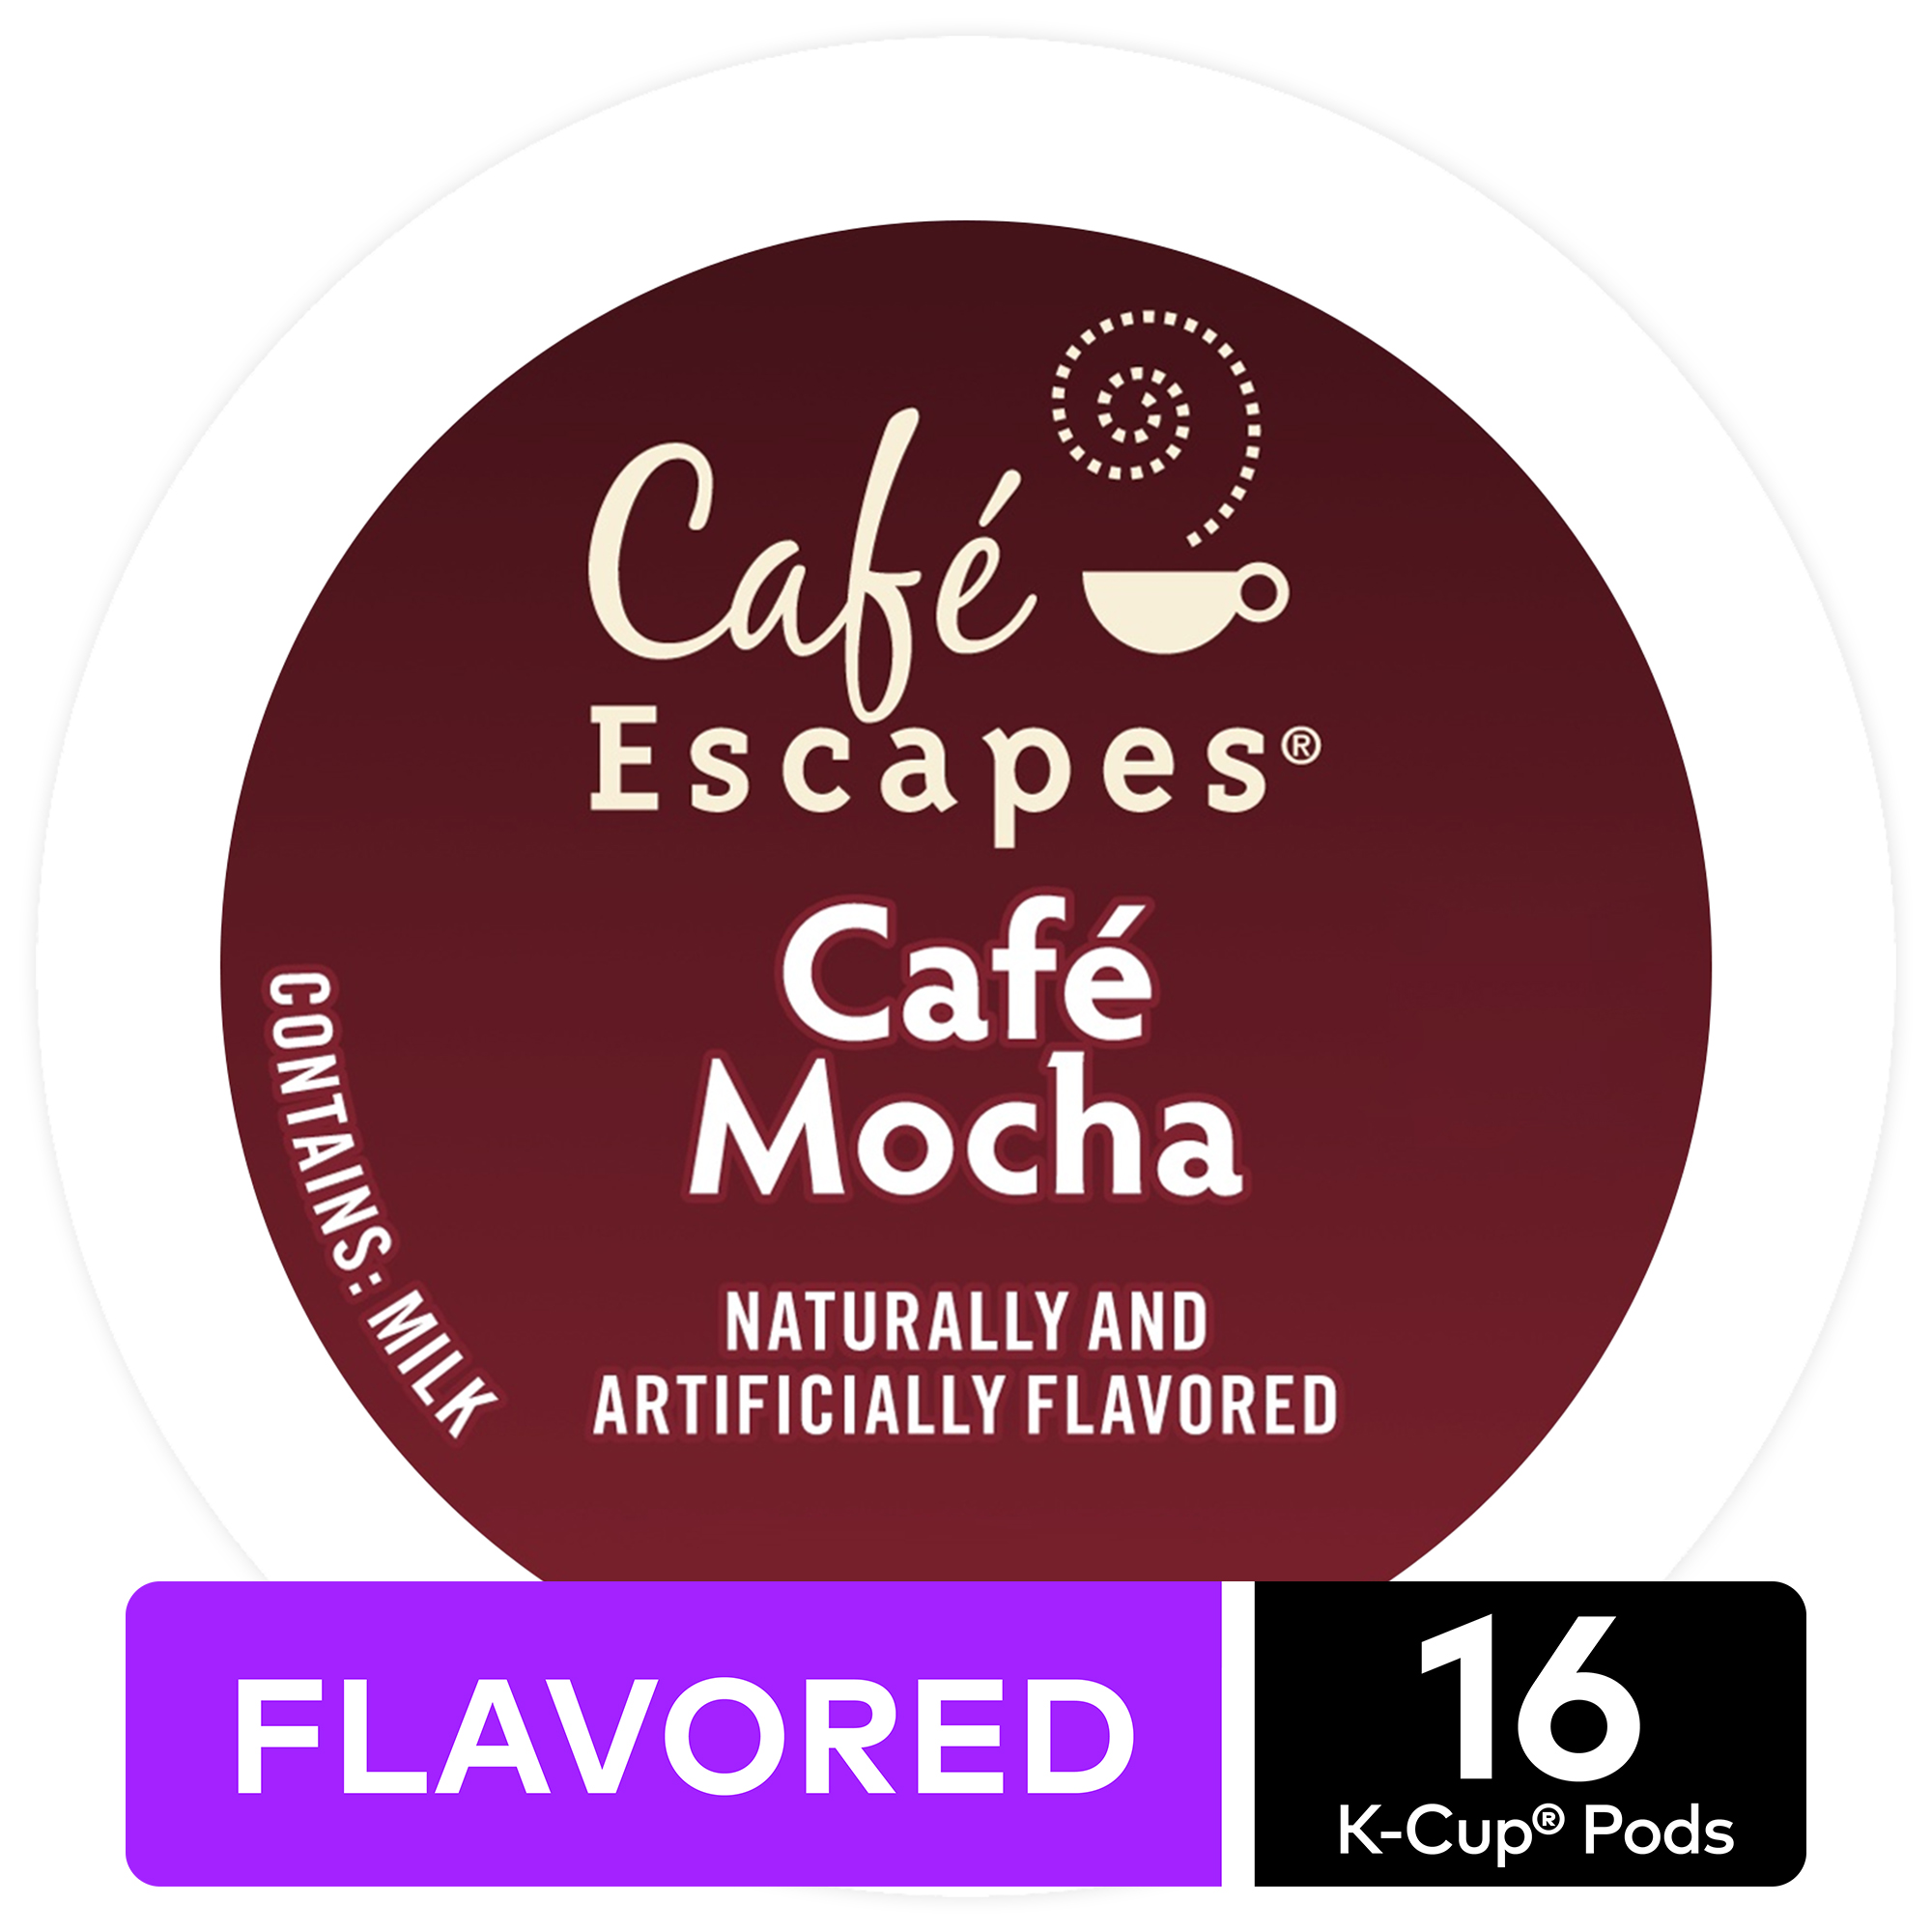 Cafe Escapes Cafe Mocha K-Cup Pods, 16 Count for Keurig Brewers - image 1 of 6